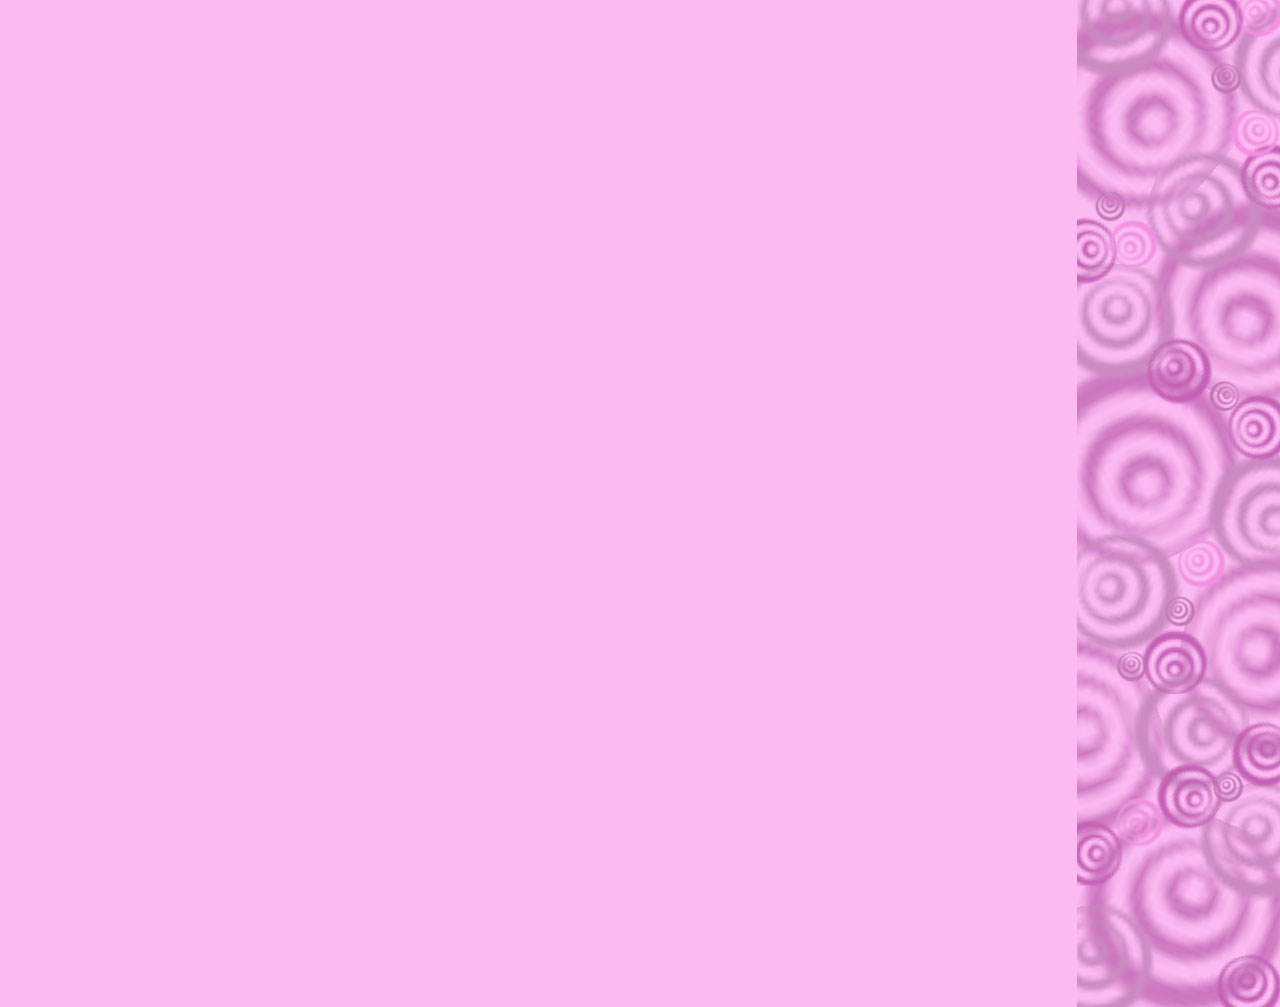 Related Pictures Purple Swirls Border With Flying Hearts Raster